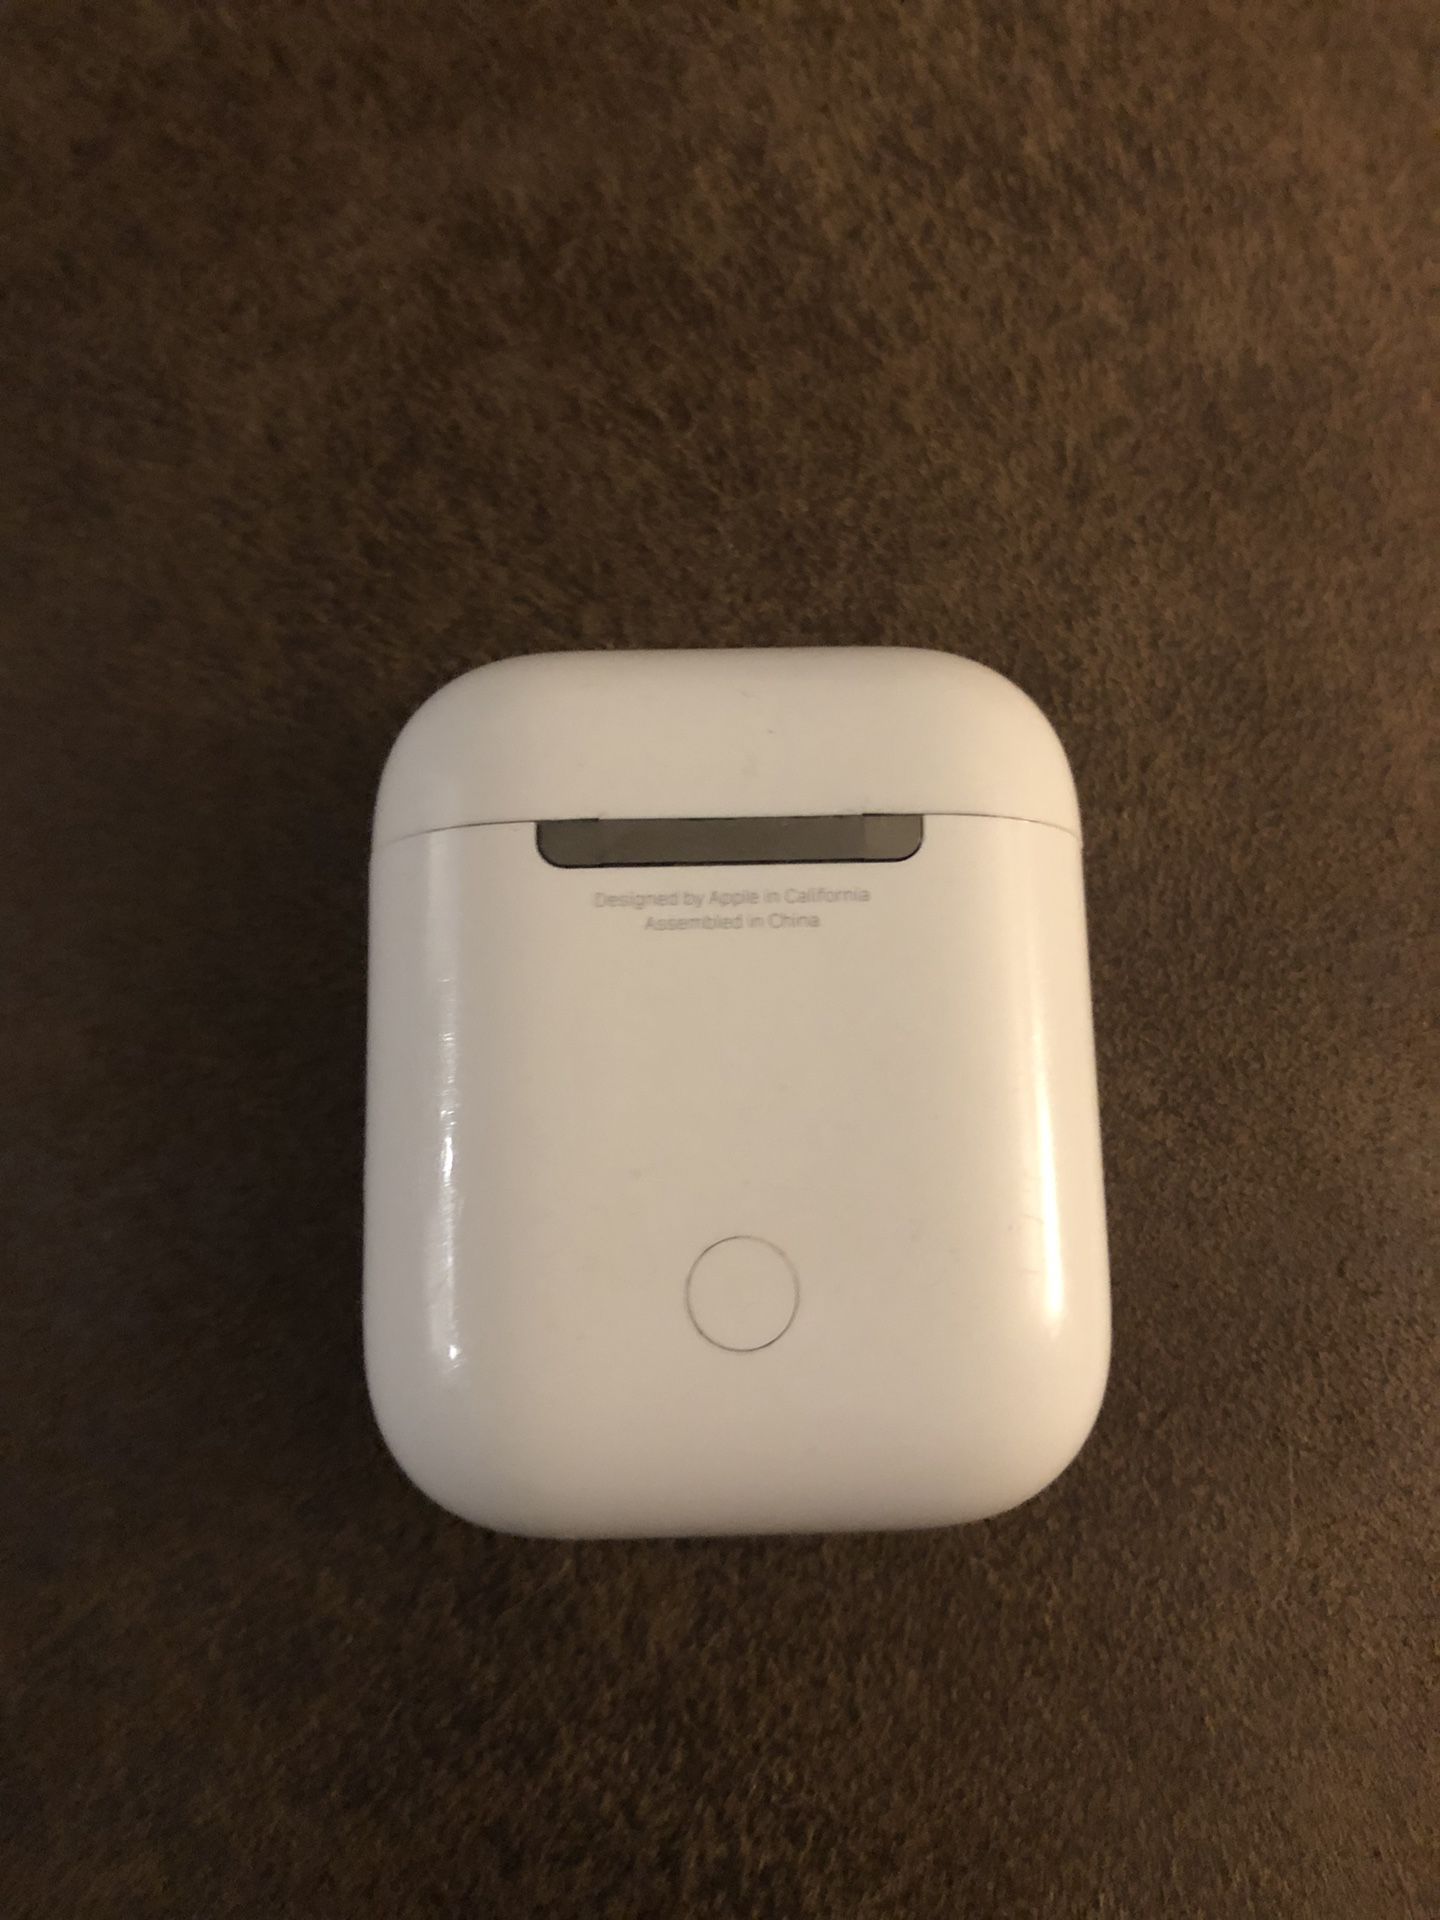 Apple Air Pods Charging Case only (no airpods)